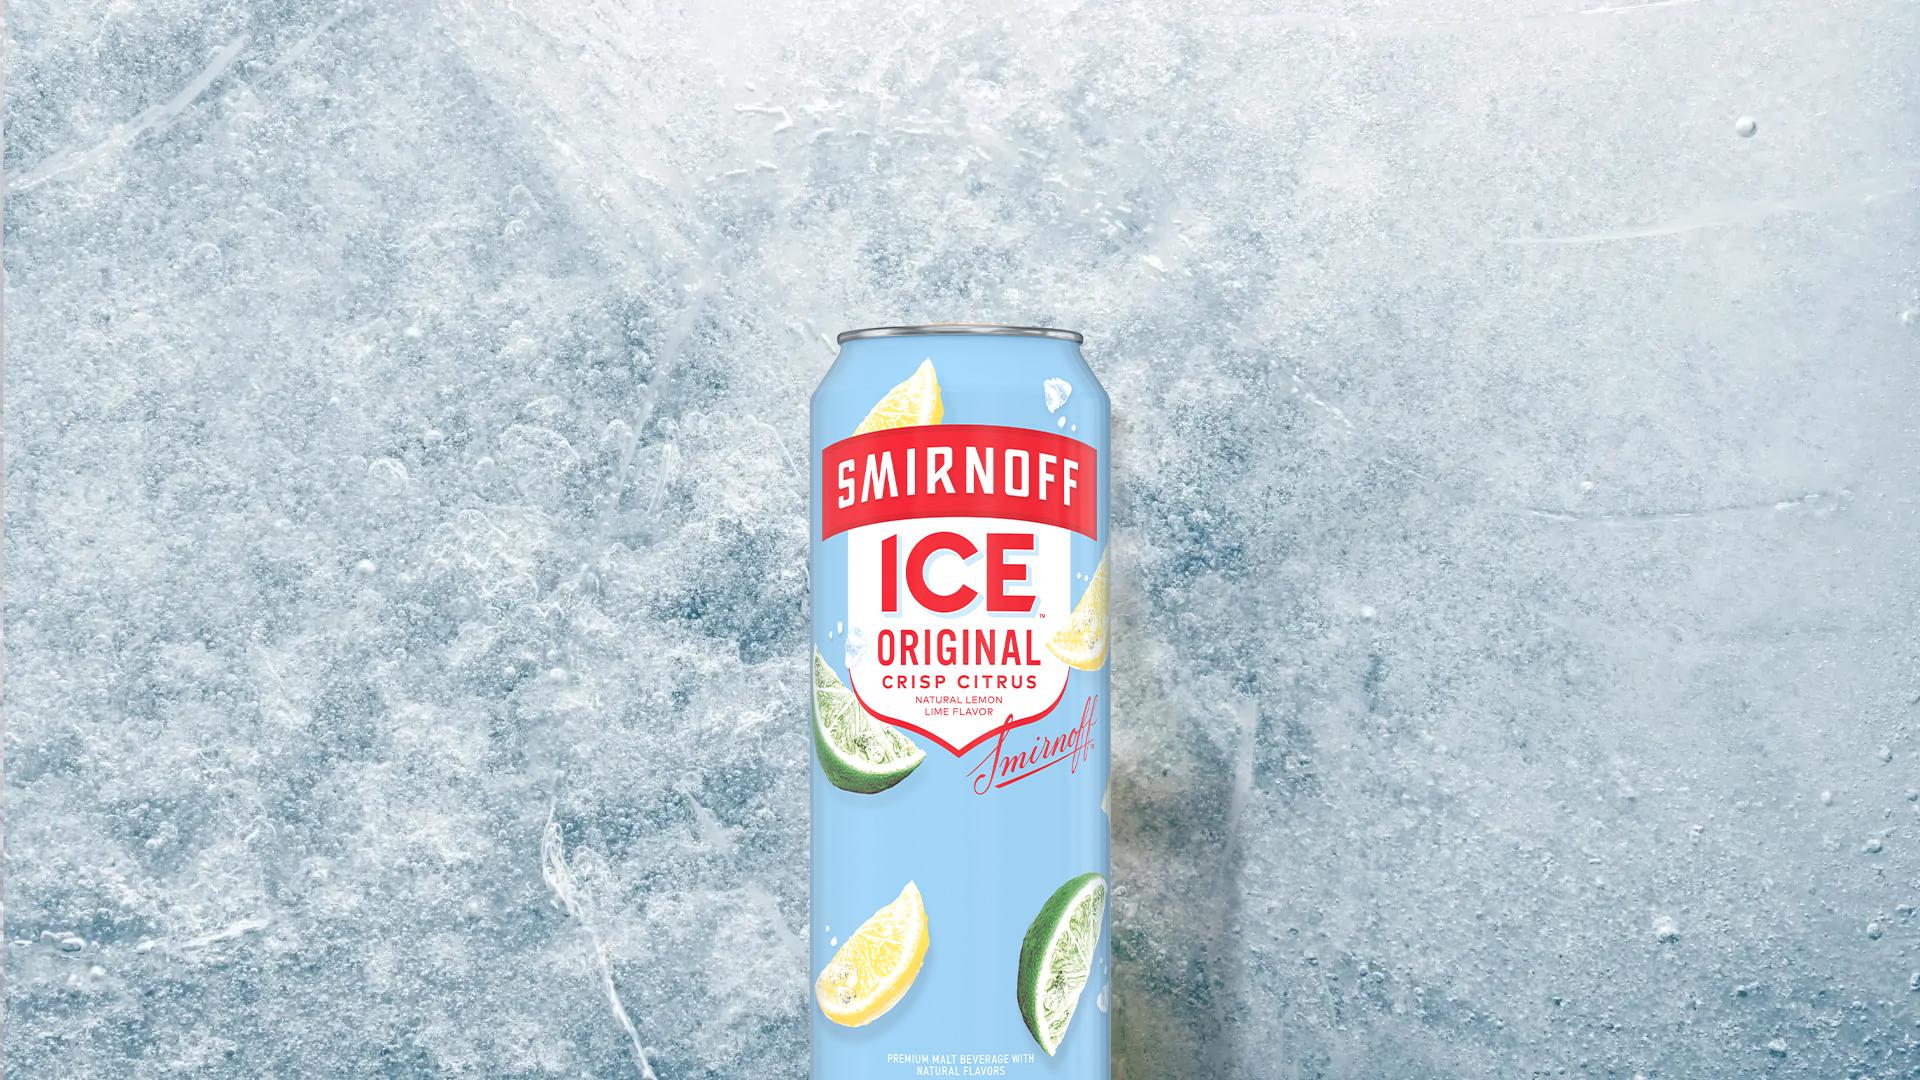 Smirnoff Ice Original can on a Icy background